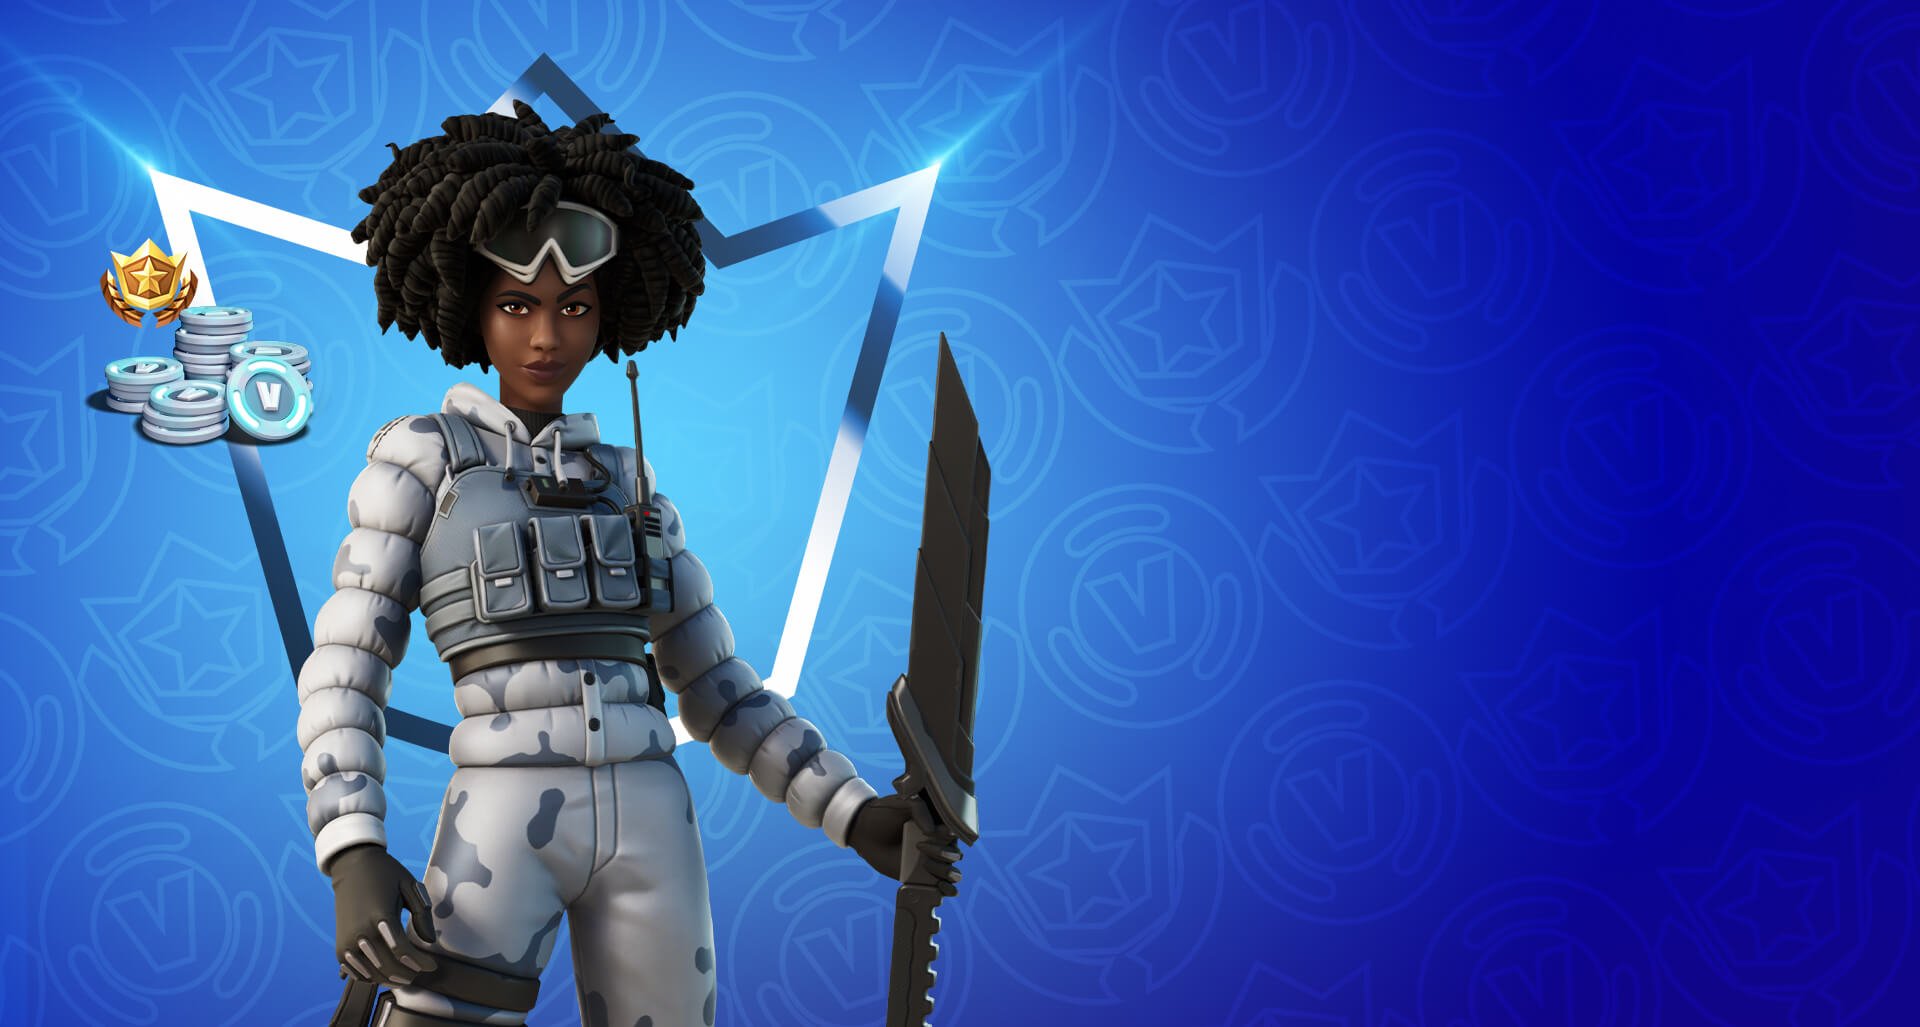 Snow Stealth Slone will be the outfit for Fortnite Crew in January 